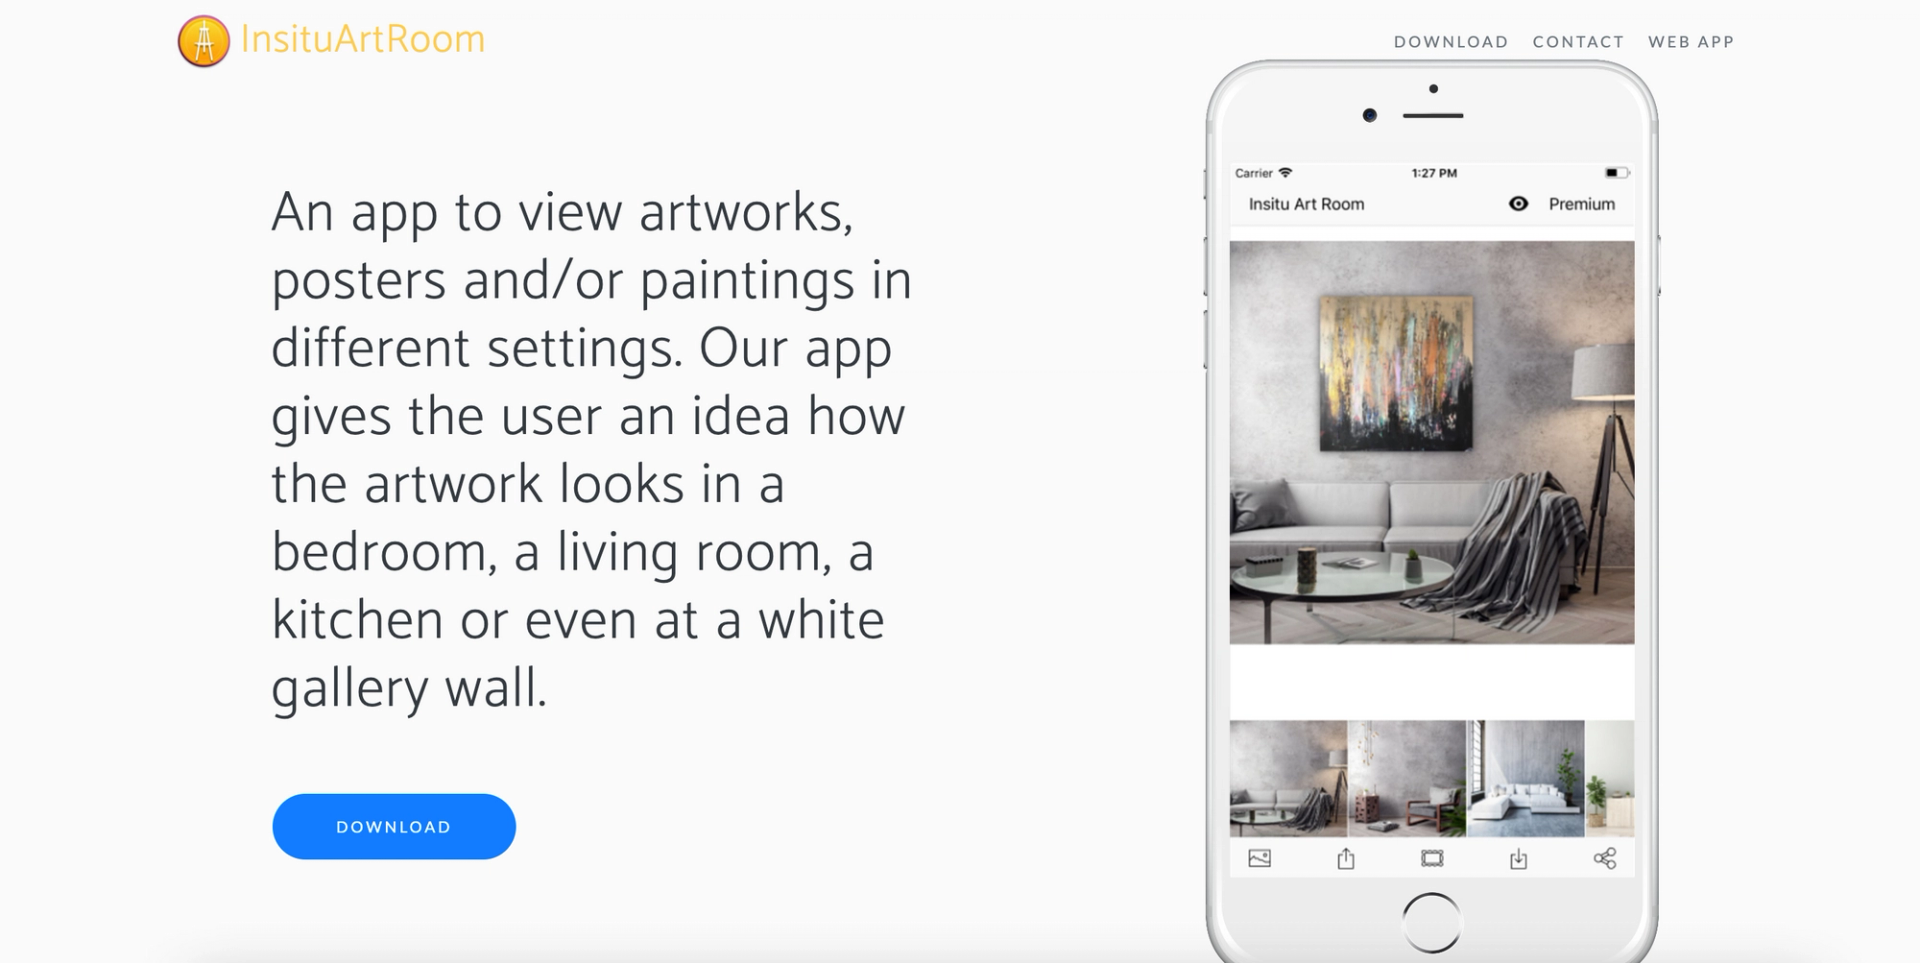 A screenshot of the landing page for the platform InSitu Art Room, showing a cellphone displaying a room with paintings displayed.